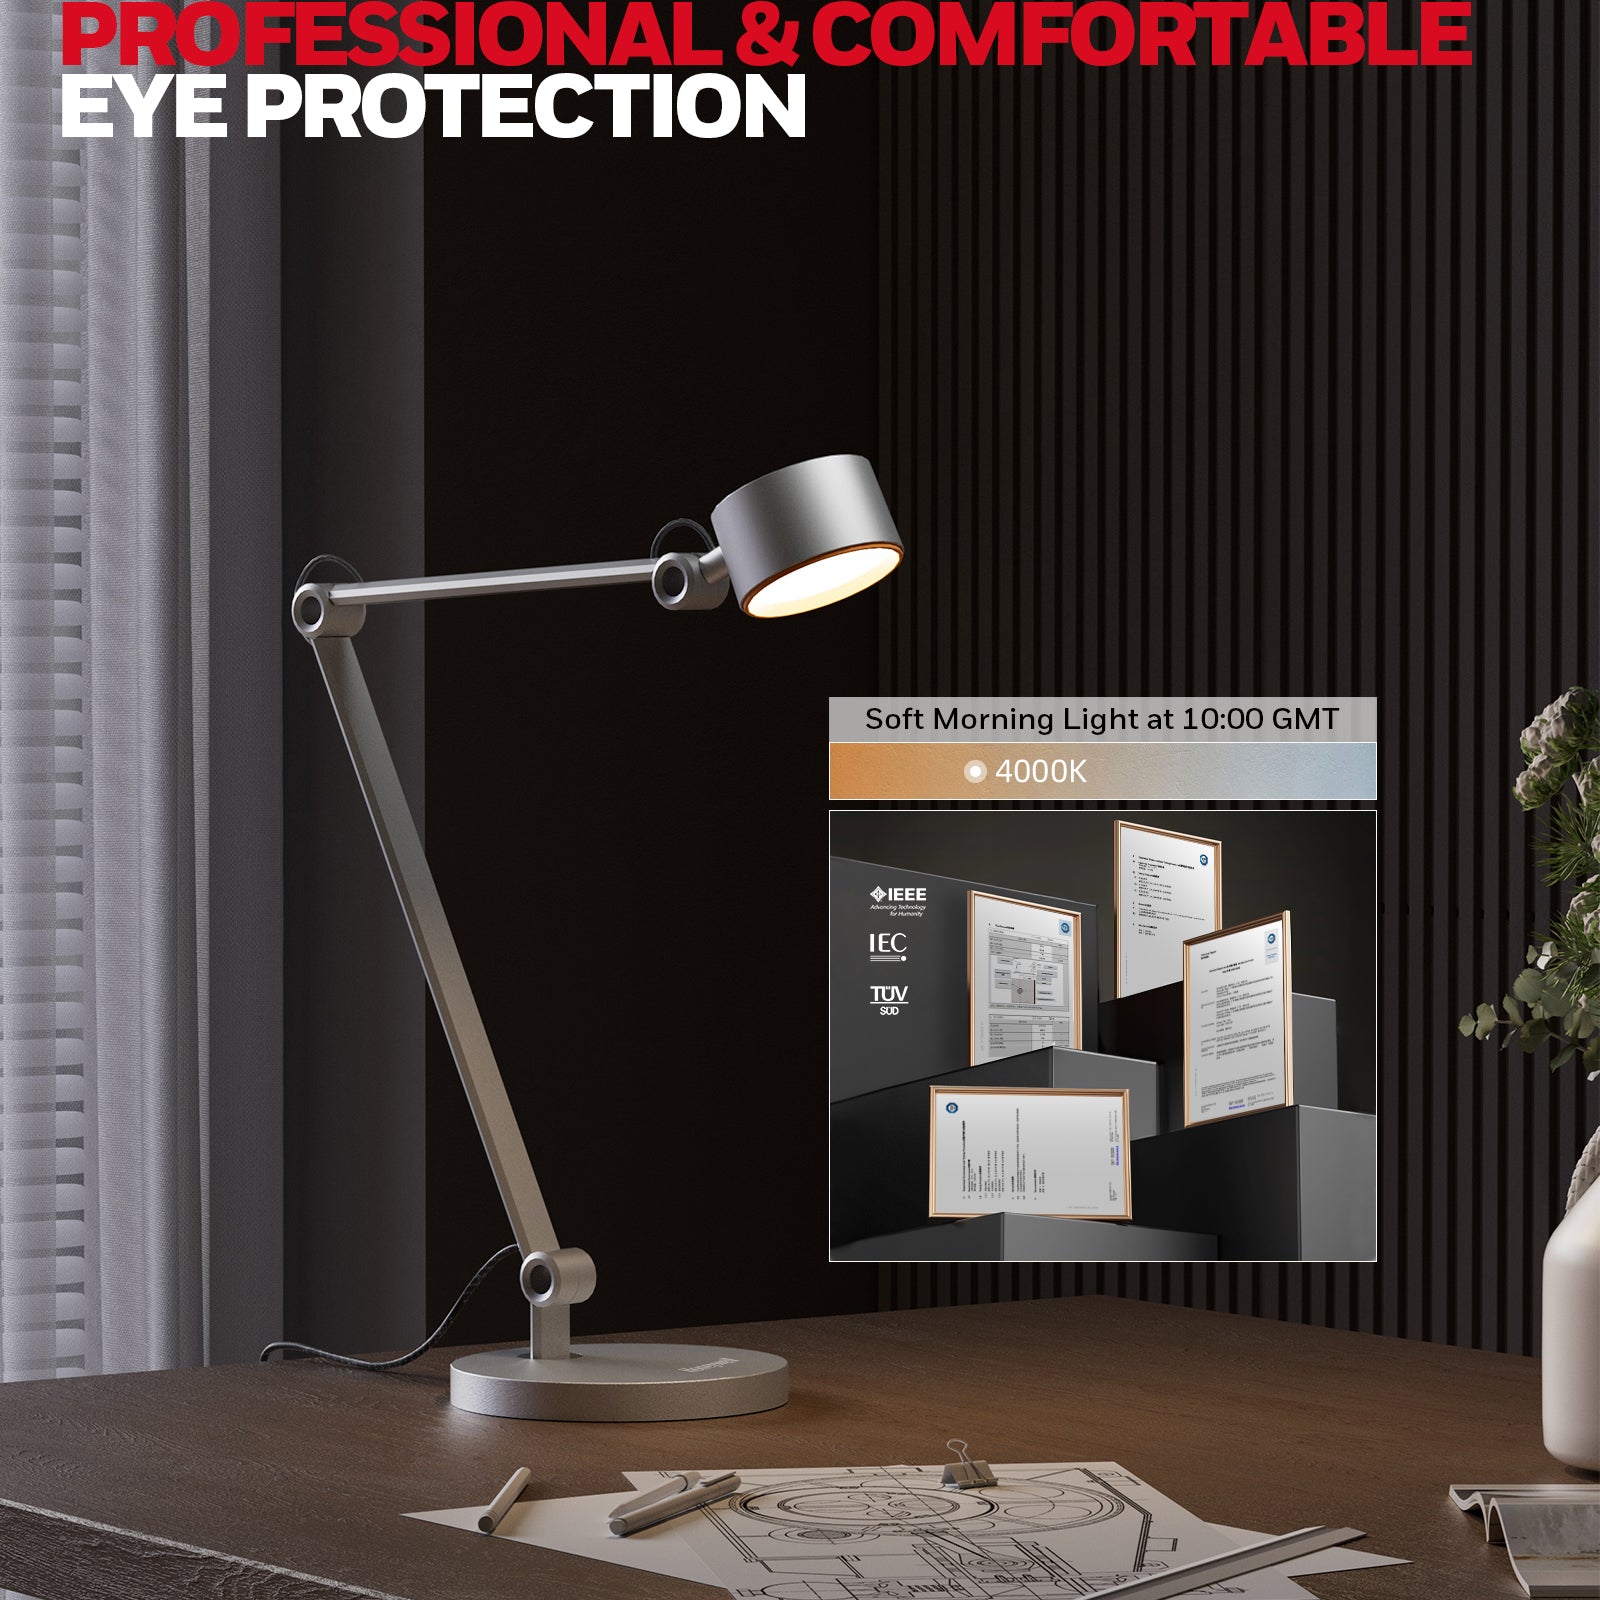 Honeywell Full Metal Efficient Desk Lamp - Sunturalux™ 01A Eye Protection with Touch Controls